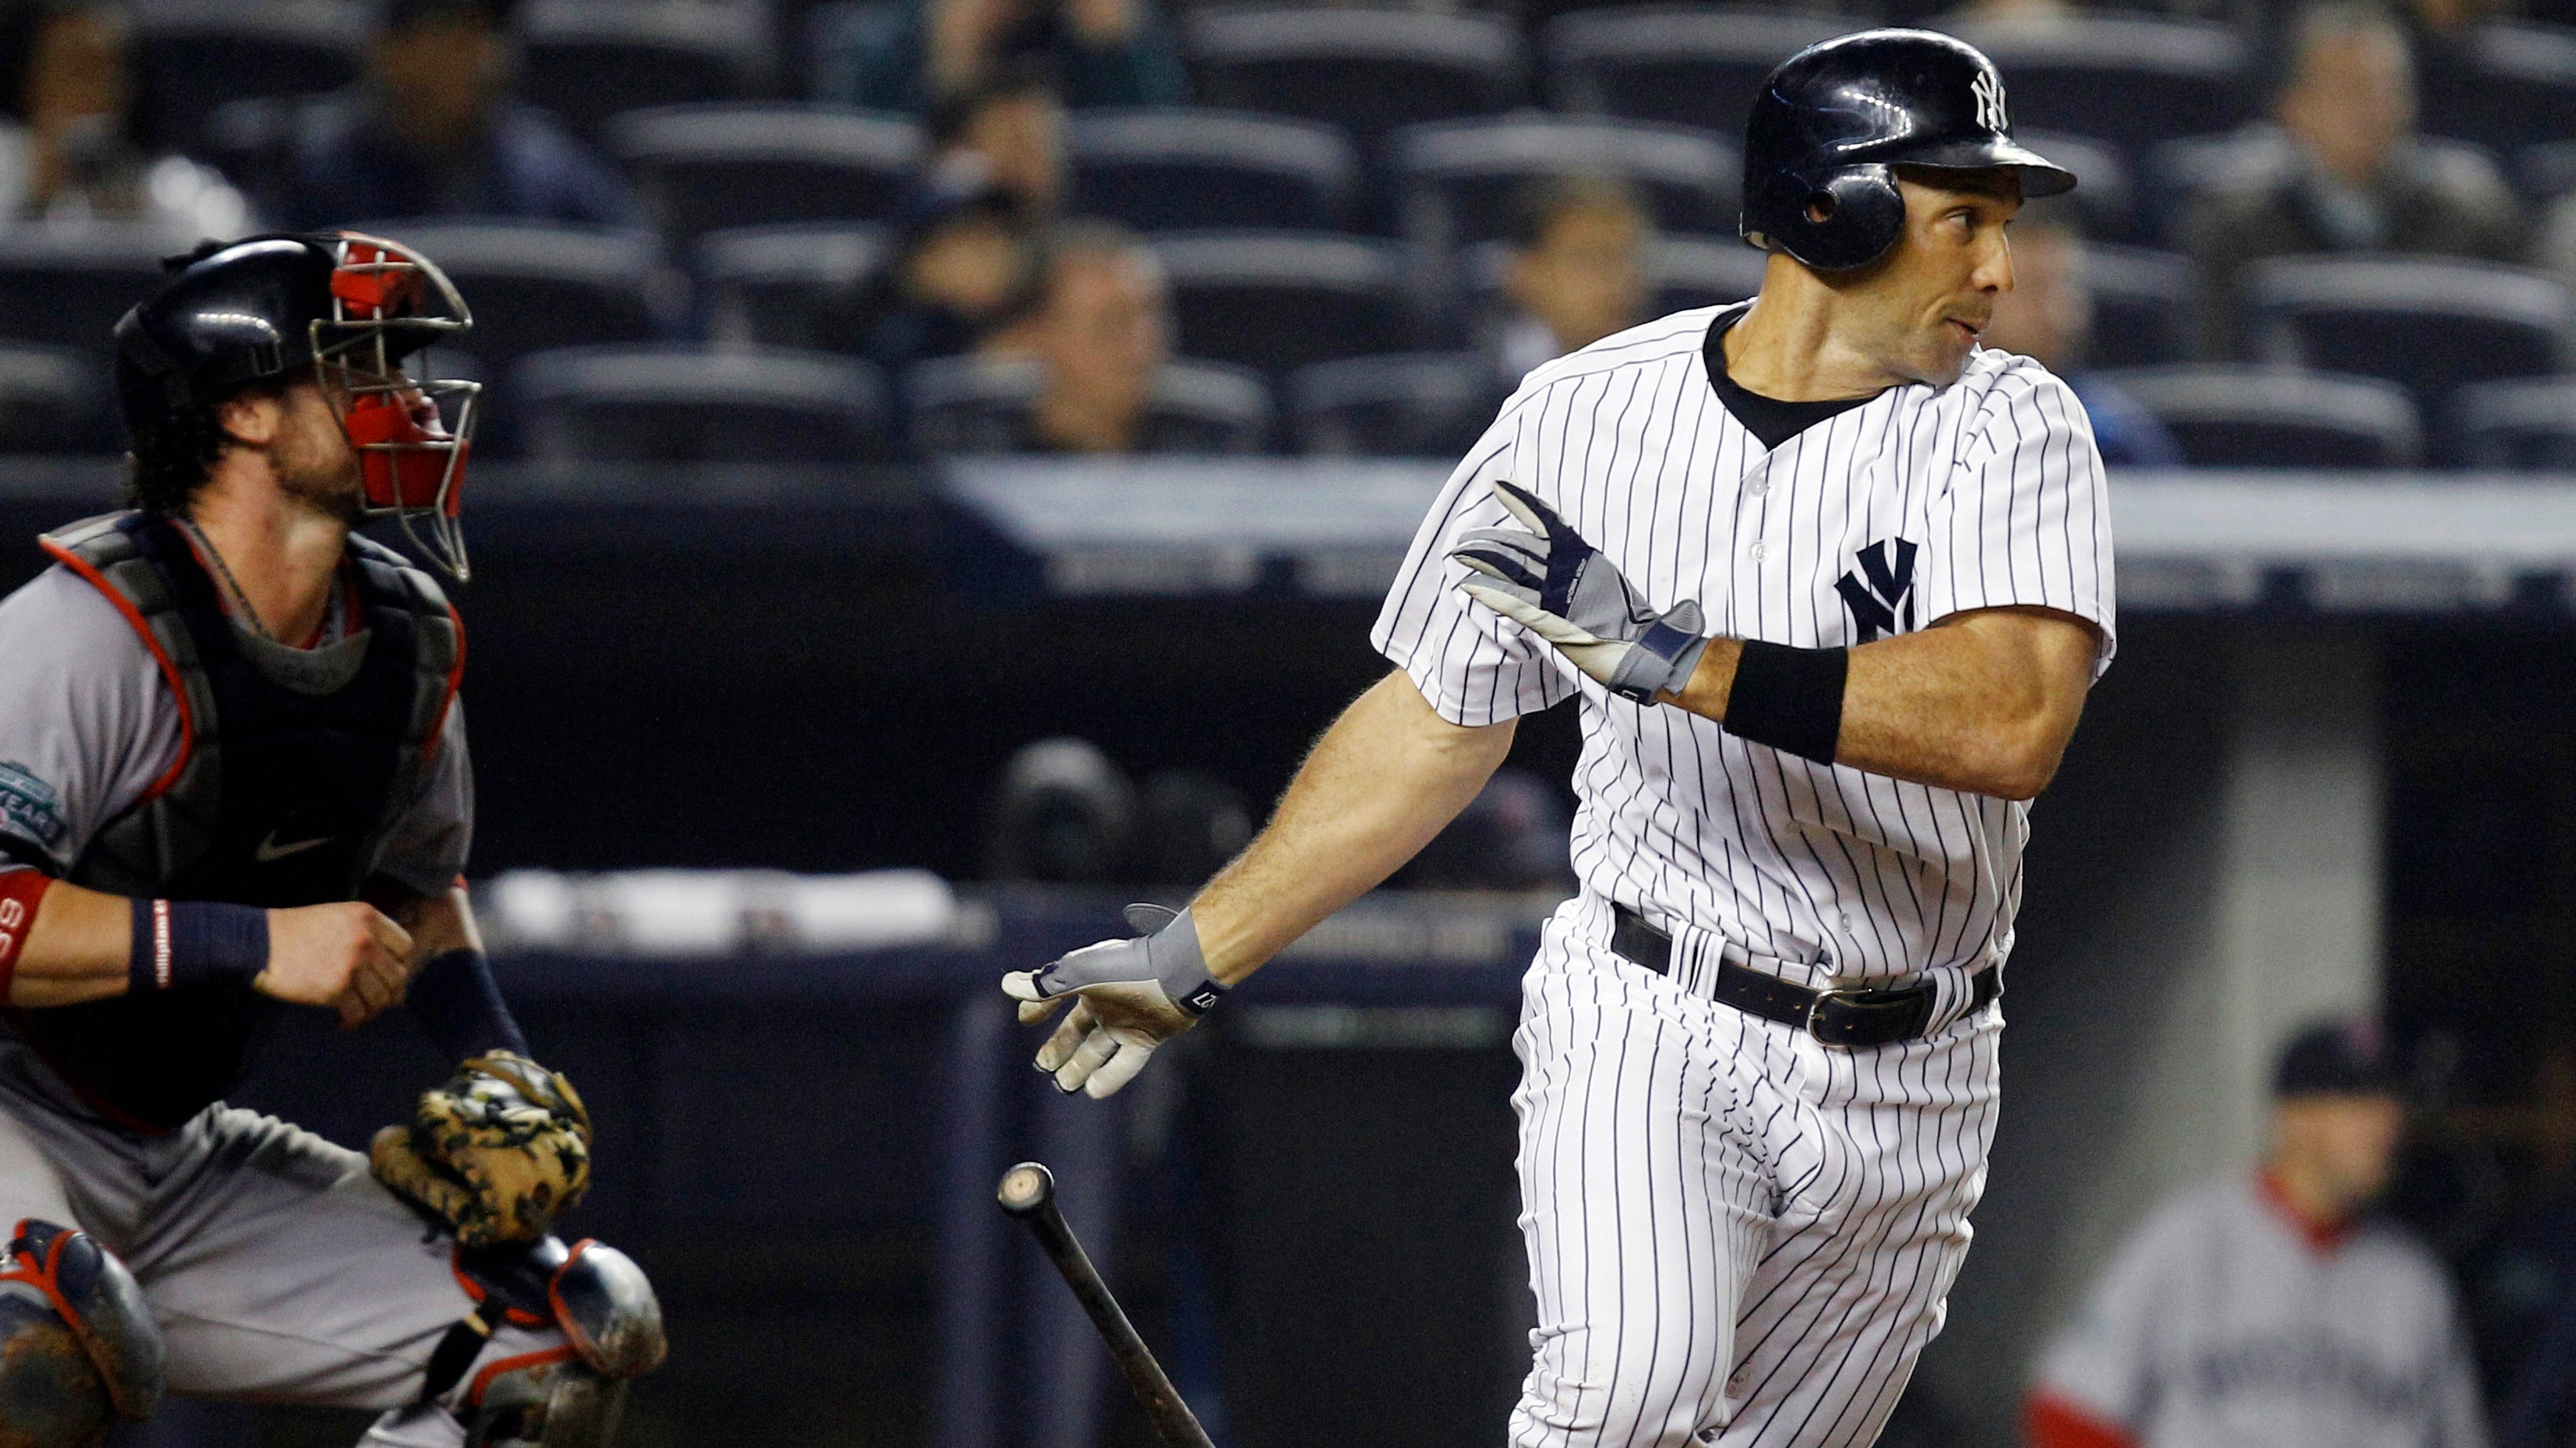 Raul Ibanez agrees to one-year deal with Seattle Mariners, source says 